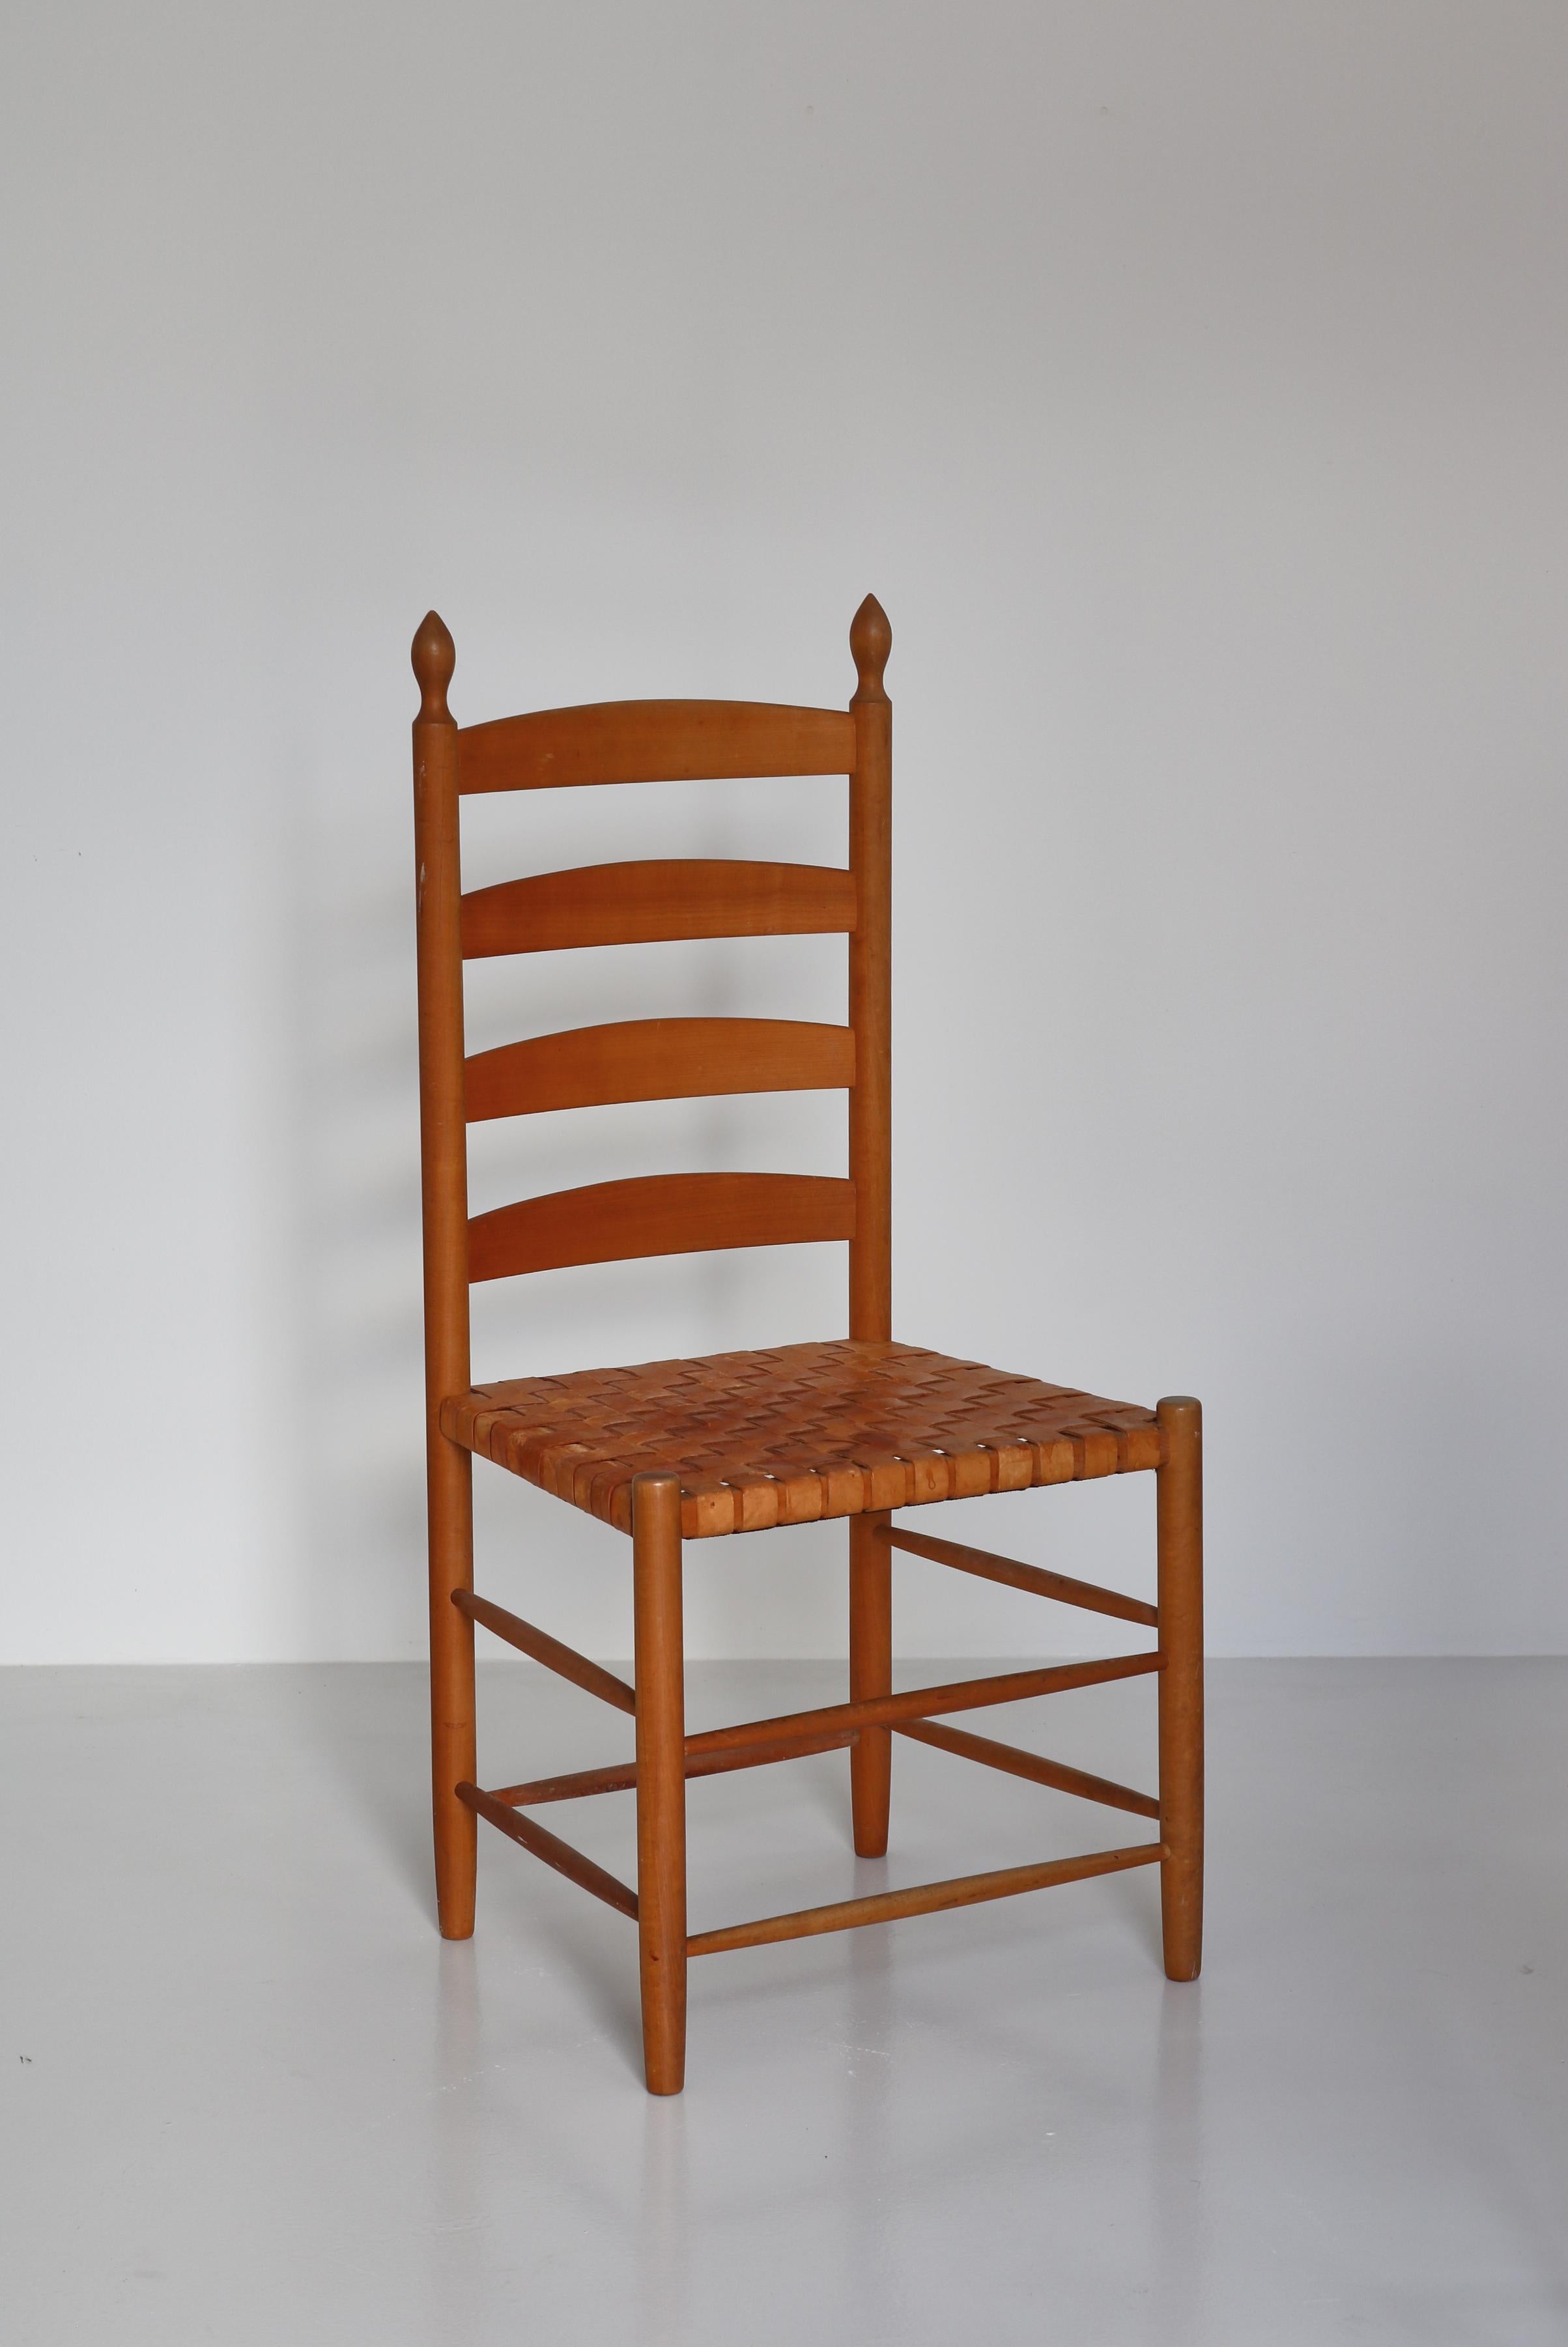 Danish Vintage Scandinavian Shaker Chair in Beech and Leather Seat, Denmark, 1960s For Sale